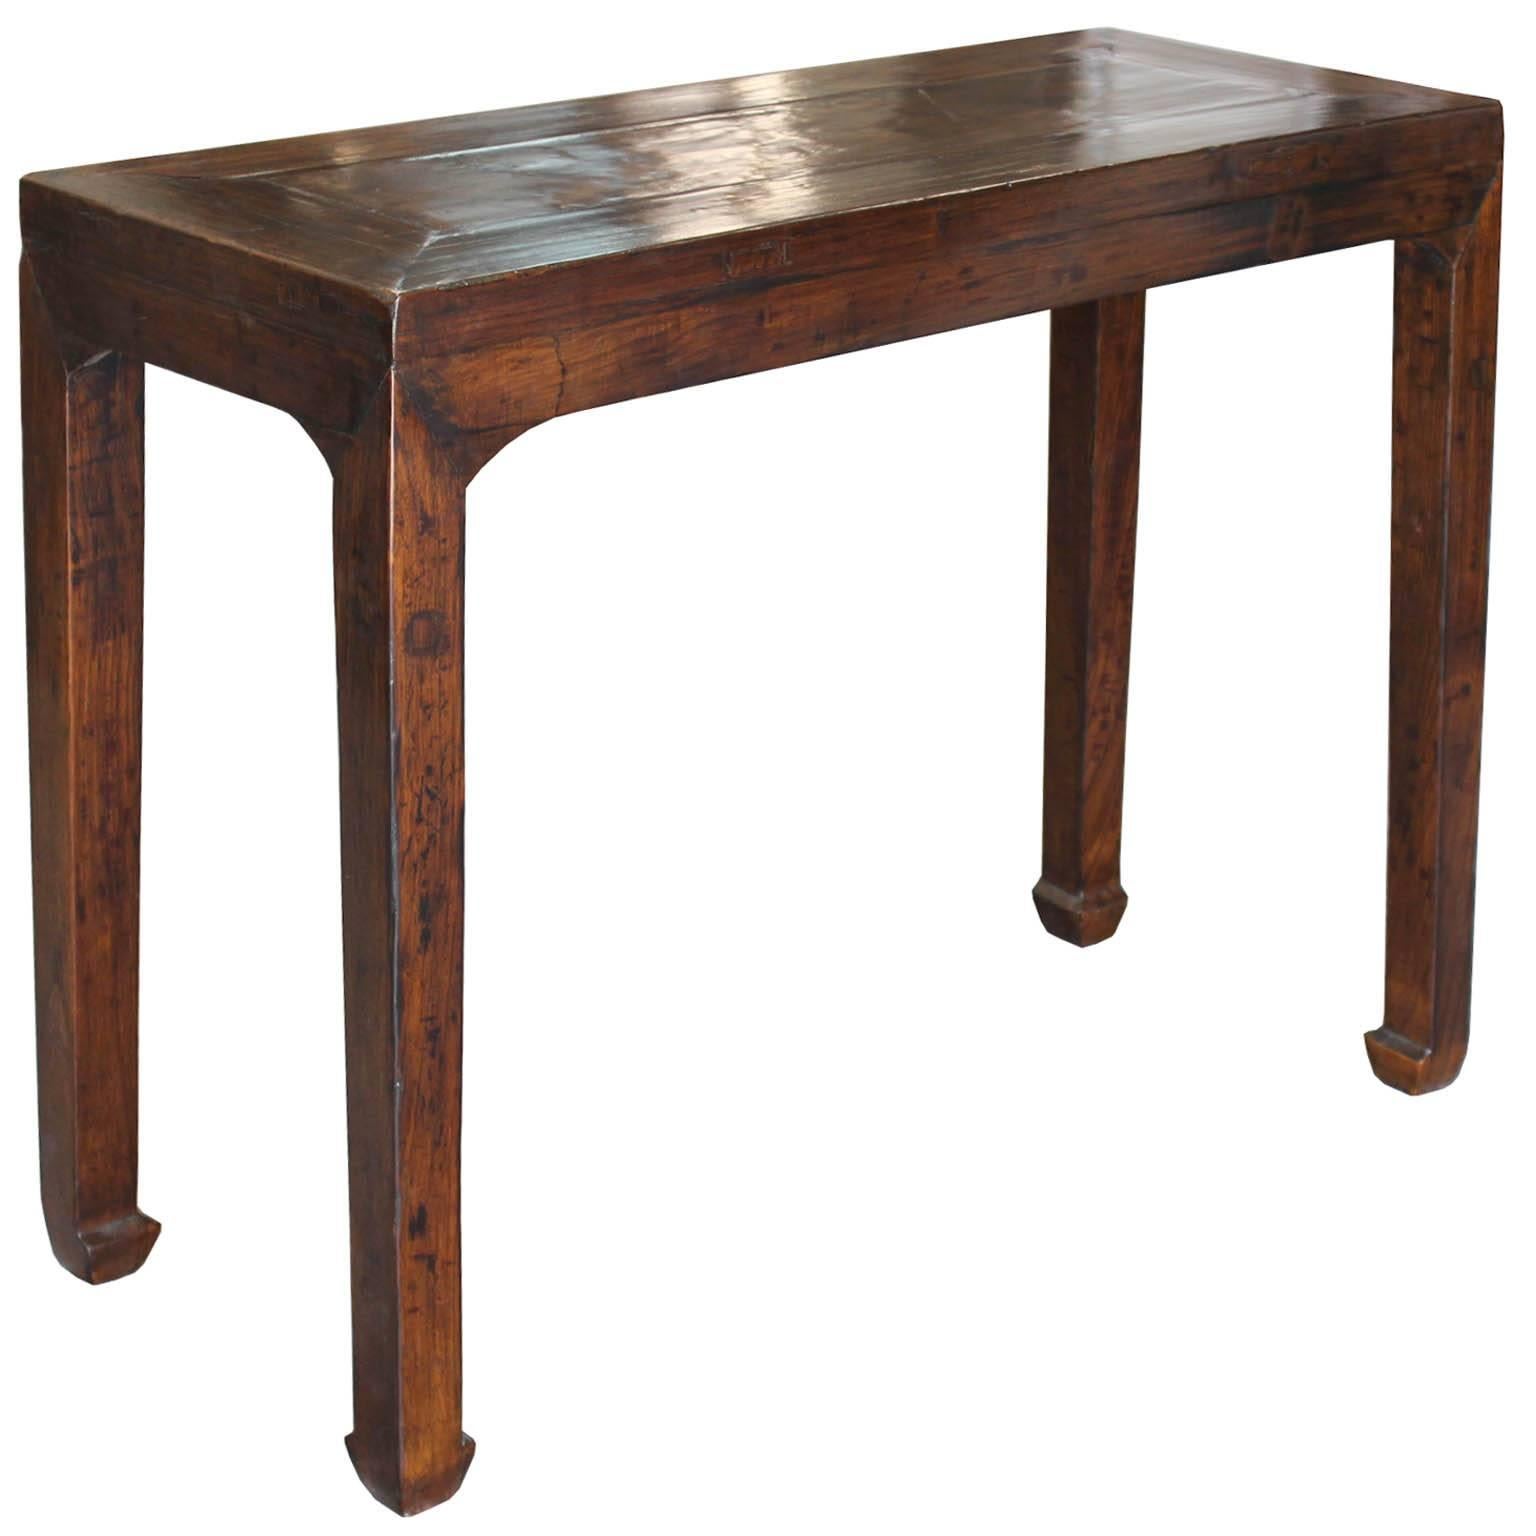 Elm console table with horse hoof-style feet can be used in an entryway with a lamp on top or as a bar table in the living room.